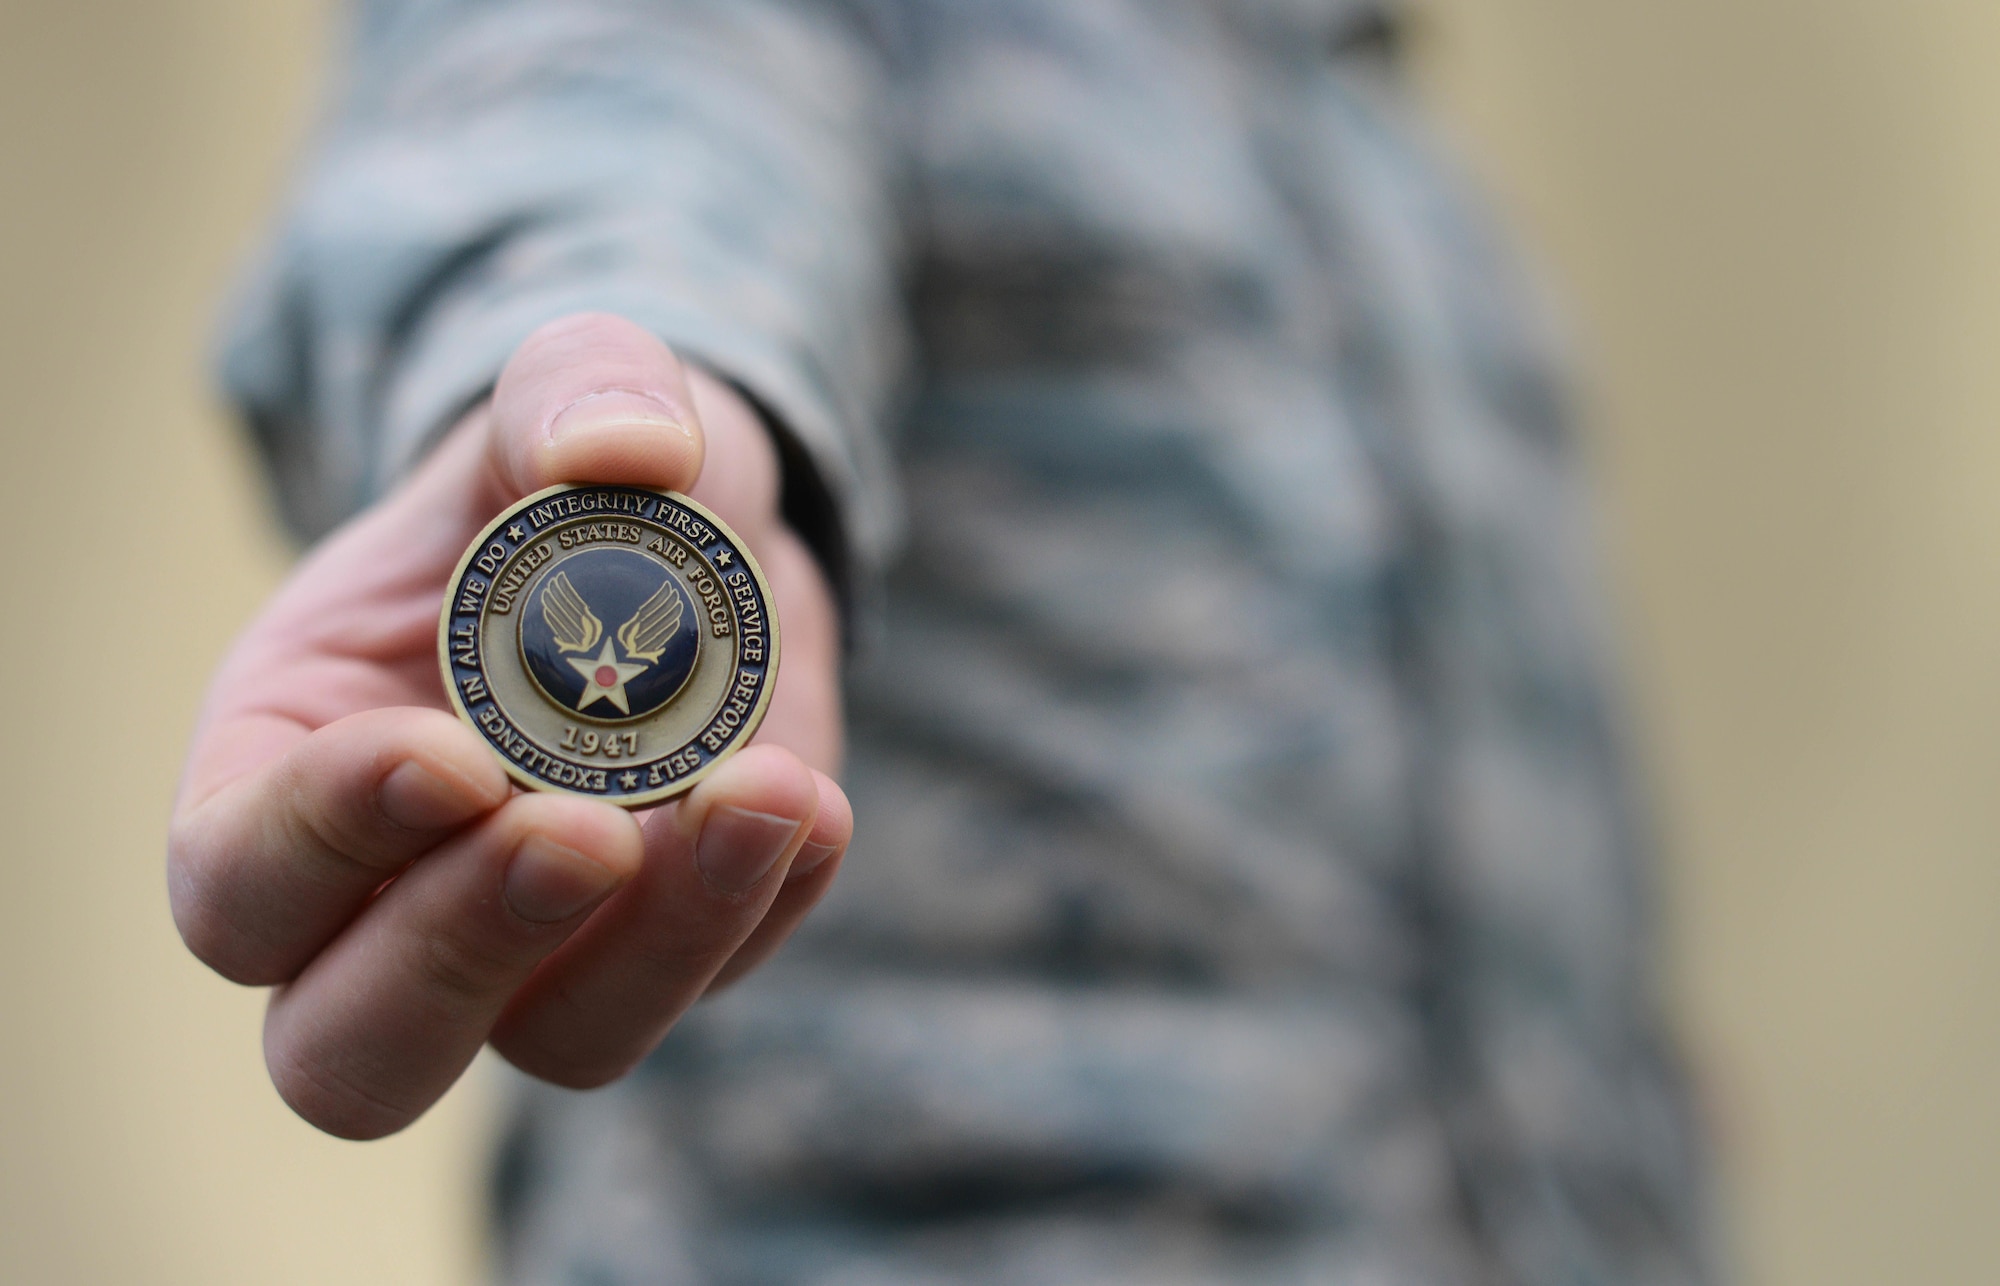 The Airman’s coin signifies the beginning of an enlisted member’s career upon graduating basic military training. The original version of the Airman’s coin featured an eagle clawing its way out of the coin with the words “Aerospace Power” under it. The most recent coin replaced the eagle with the new Air Force symbol. (U.S. Air Force photo/Airman 1st Class Deana Heitzman)